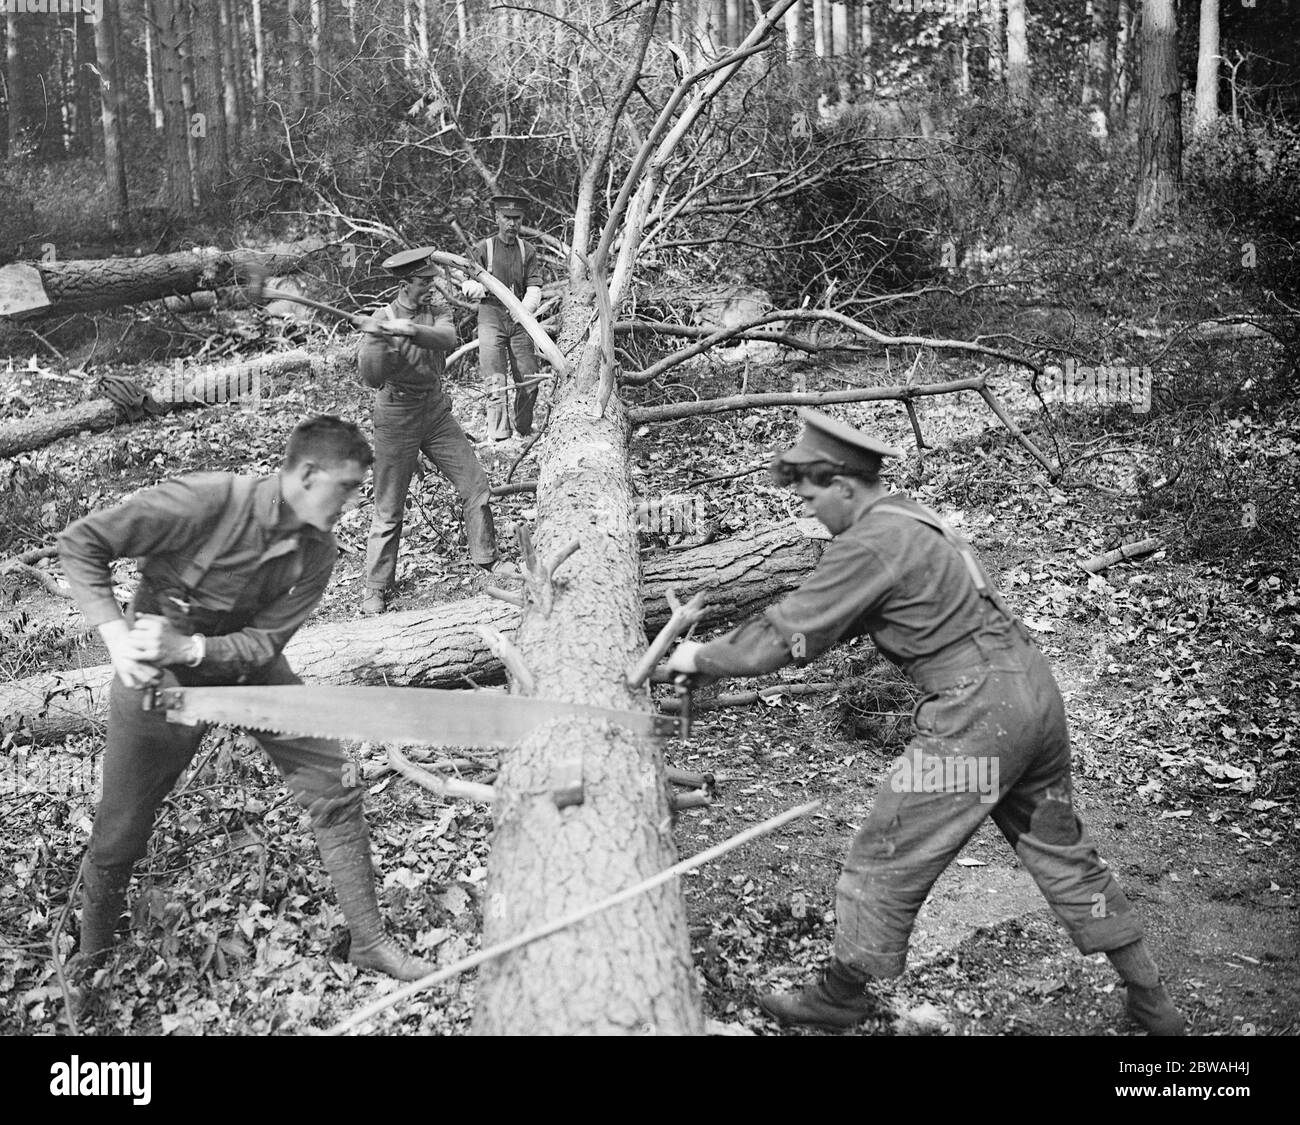 Canadian lumberman in Windsor Great Park 1500 Canadian lumbermen are now employed in felling timber in the crown forests Our photo taken in Windsor Great Park shows a tree being cut into foot long longths . In the background men are cutting off the branches Stock Photo